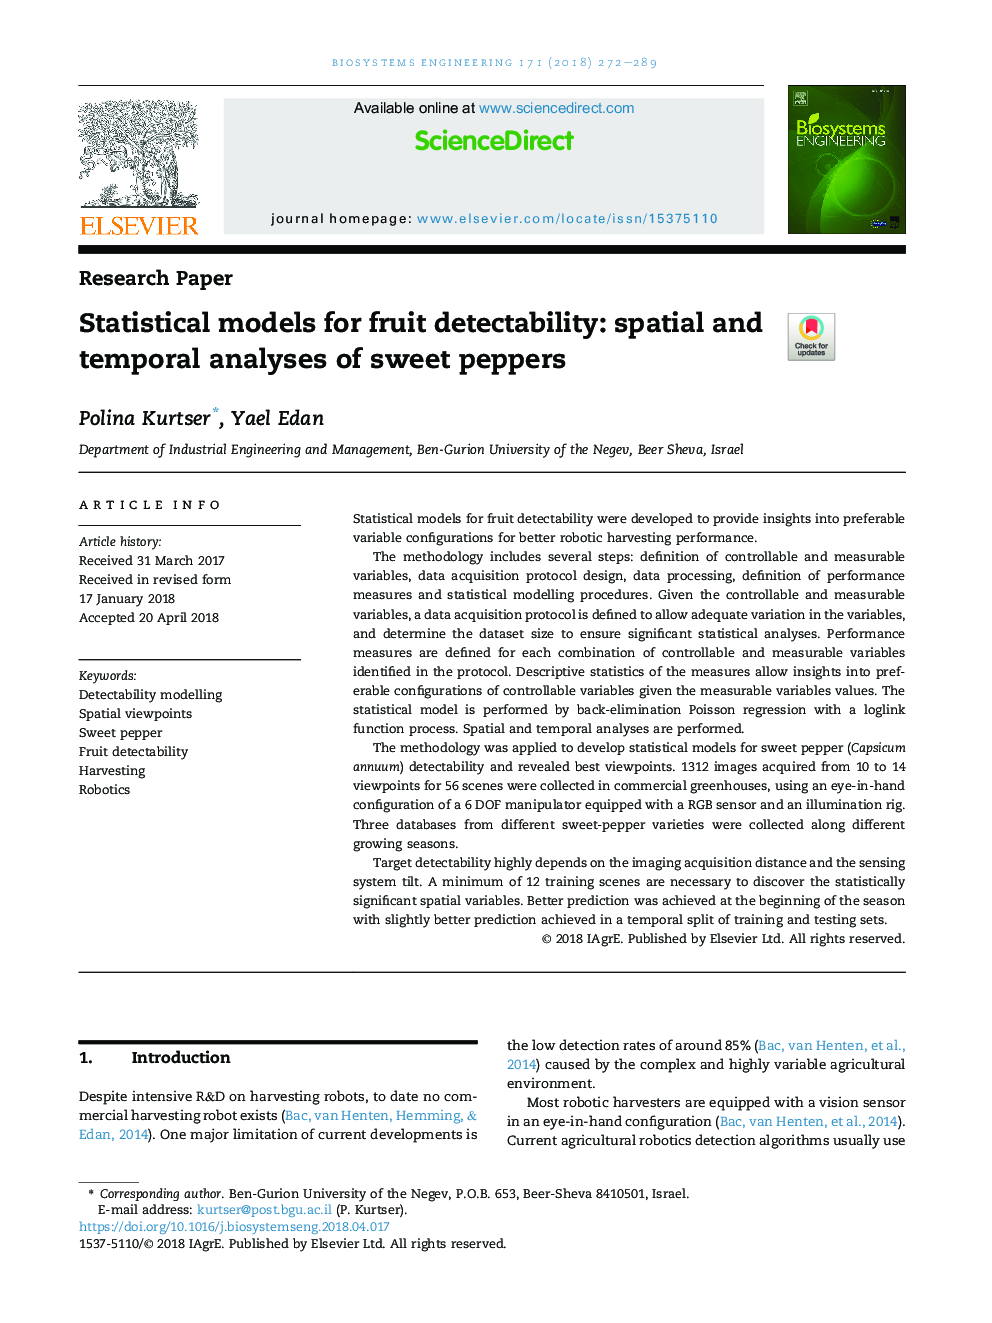 Statistical models for fruit detectability: spatial and temporal analyses of sweet peppers